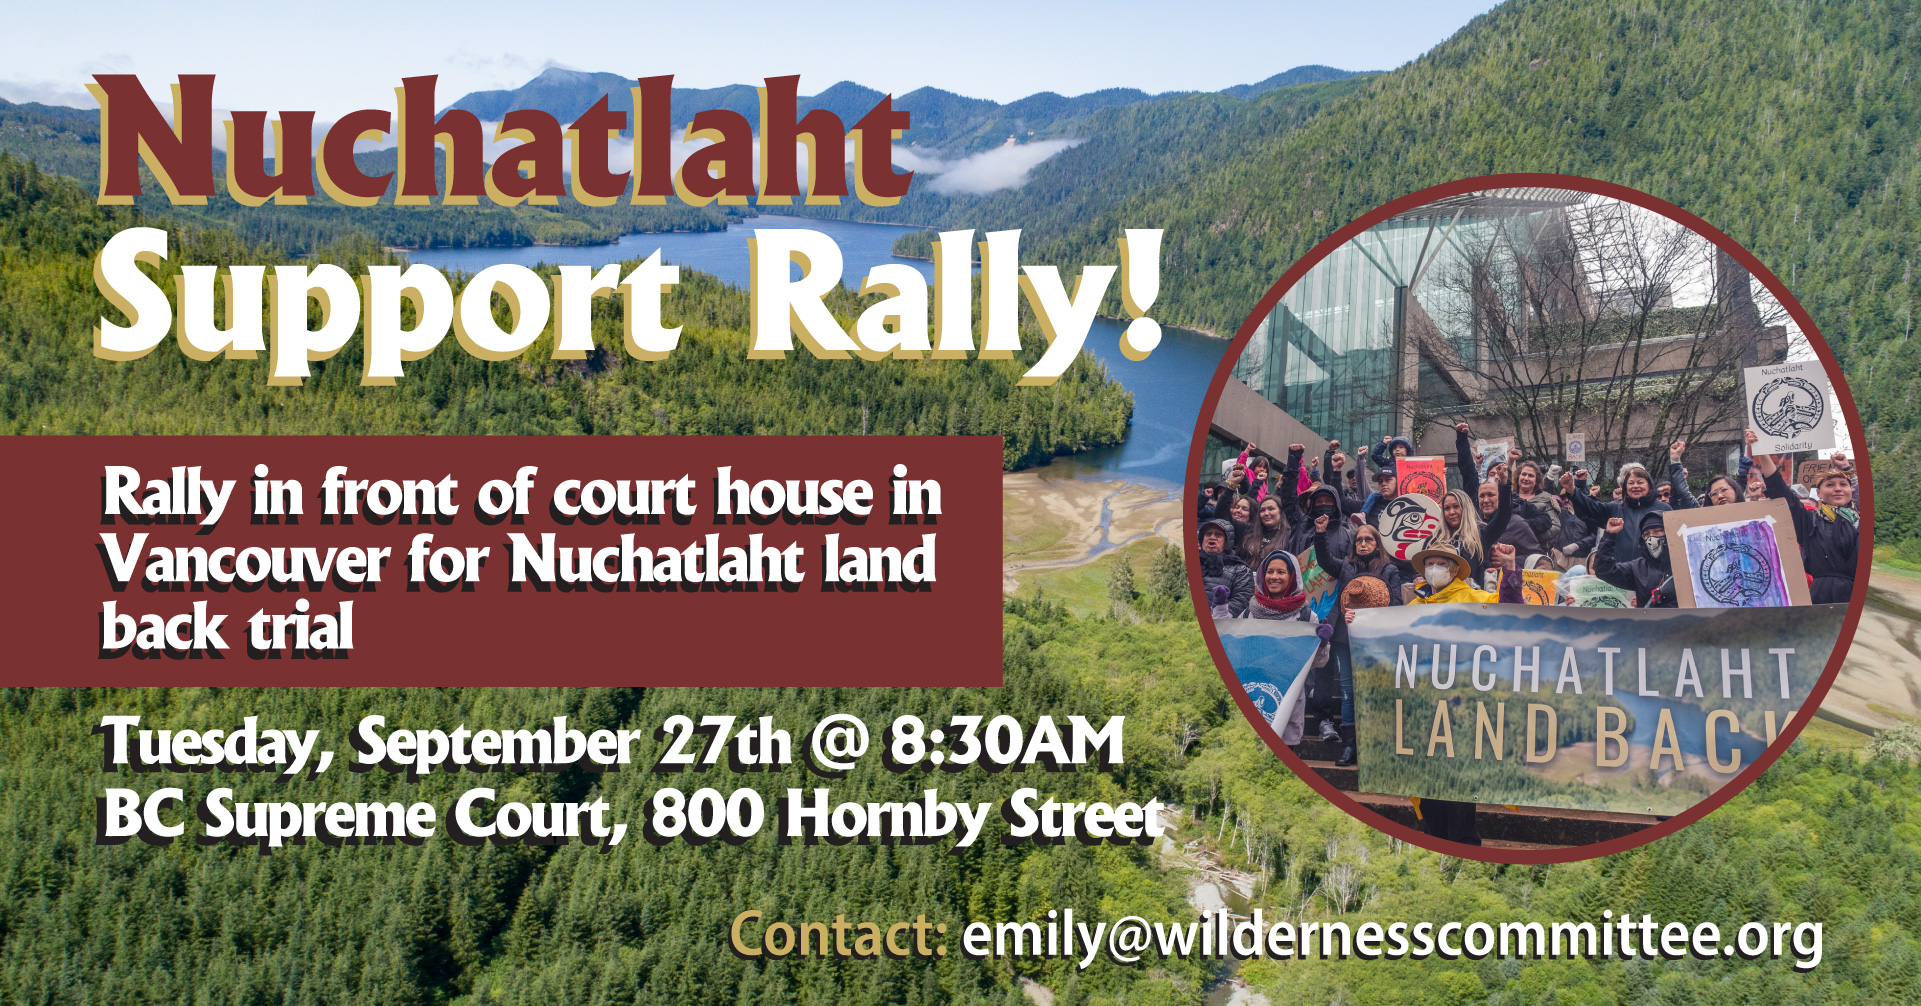 A poster of the Nuchatlaht Support Rally. There is a photo of mountains and rivers in the background, and a smaller photo of members of the Nuchatlaht with their supporters holding various posters. Text over the image gives information about the rally location and time. End of image description.